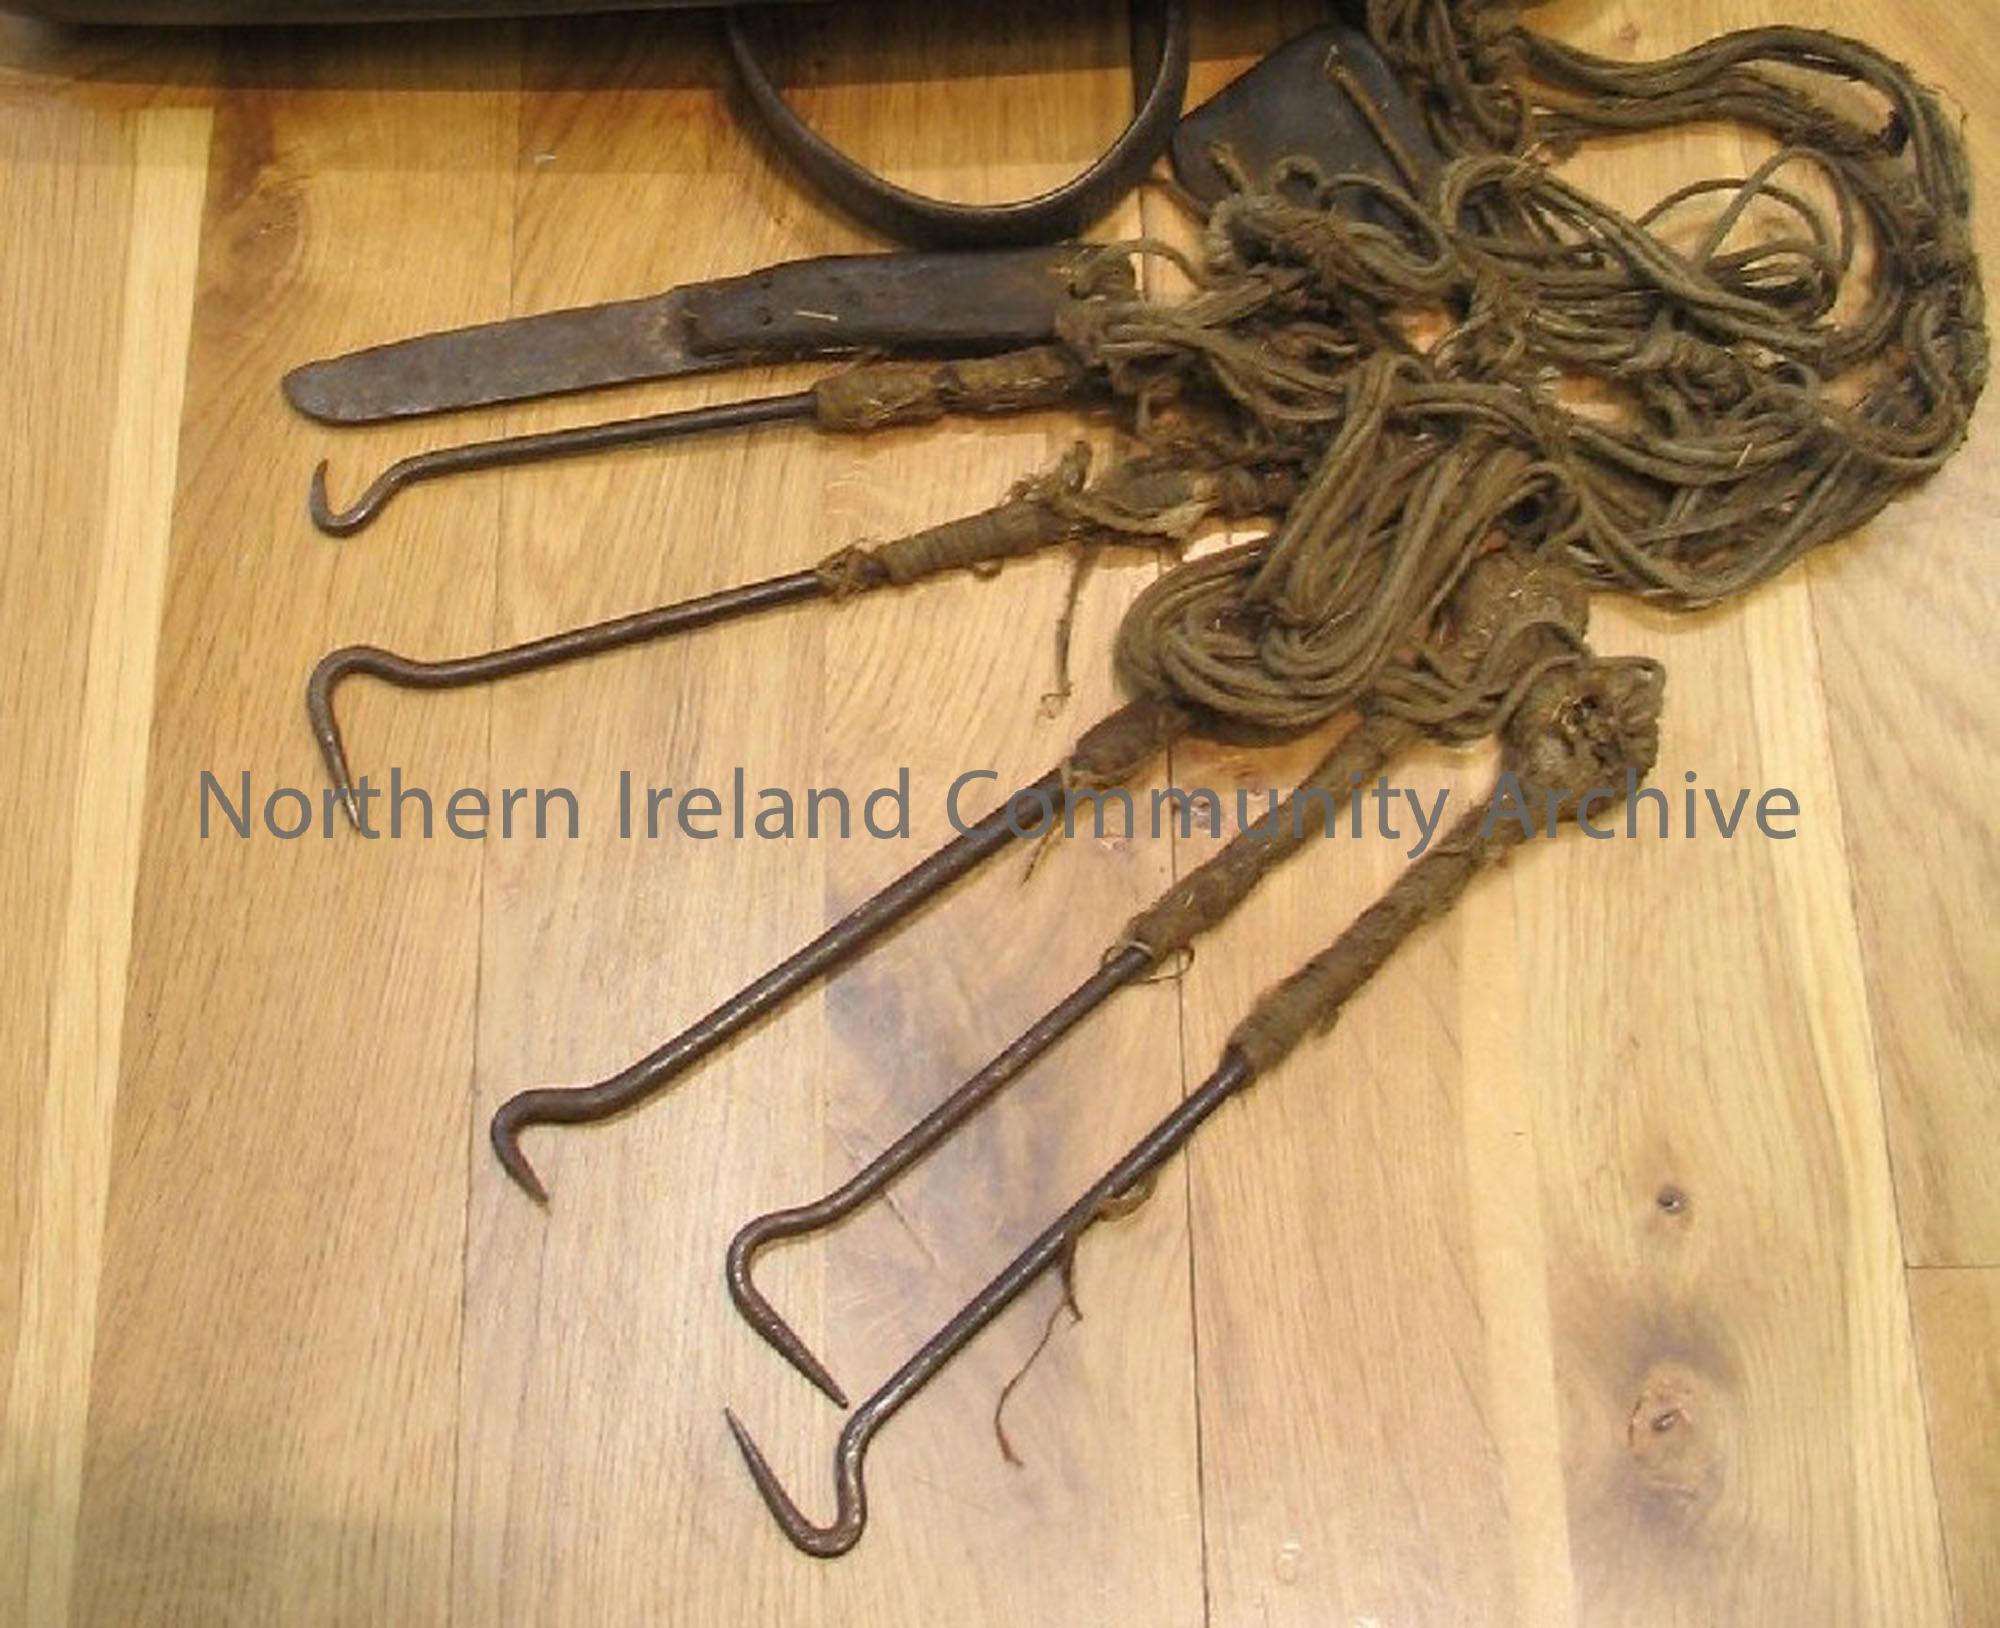 Set of spinning tools from Balnamore Mill, used by donor when she worked there